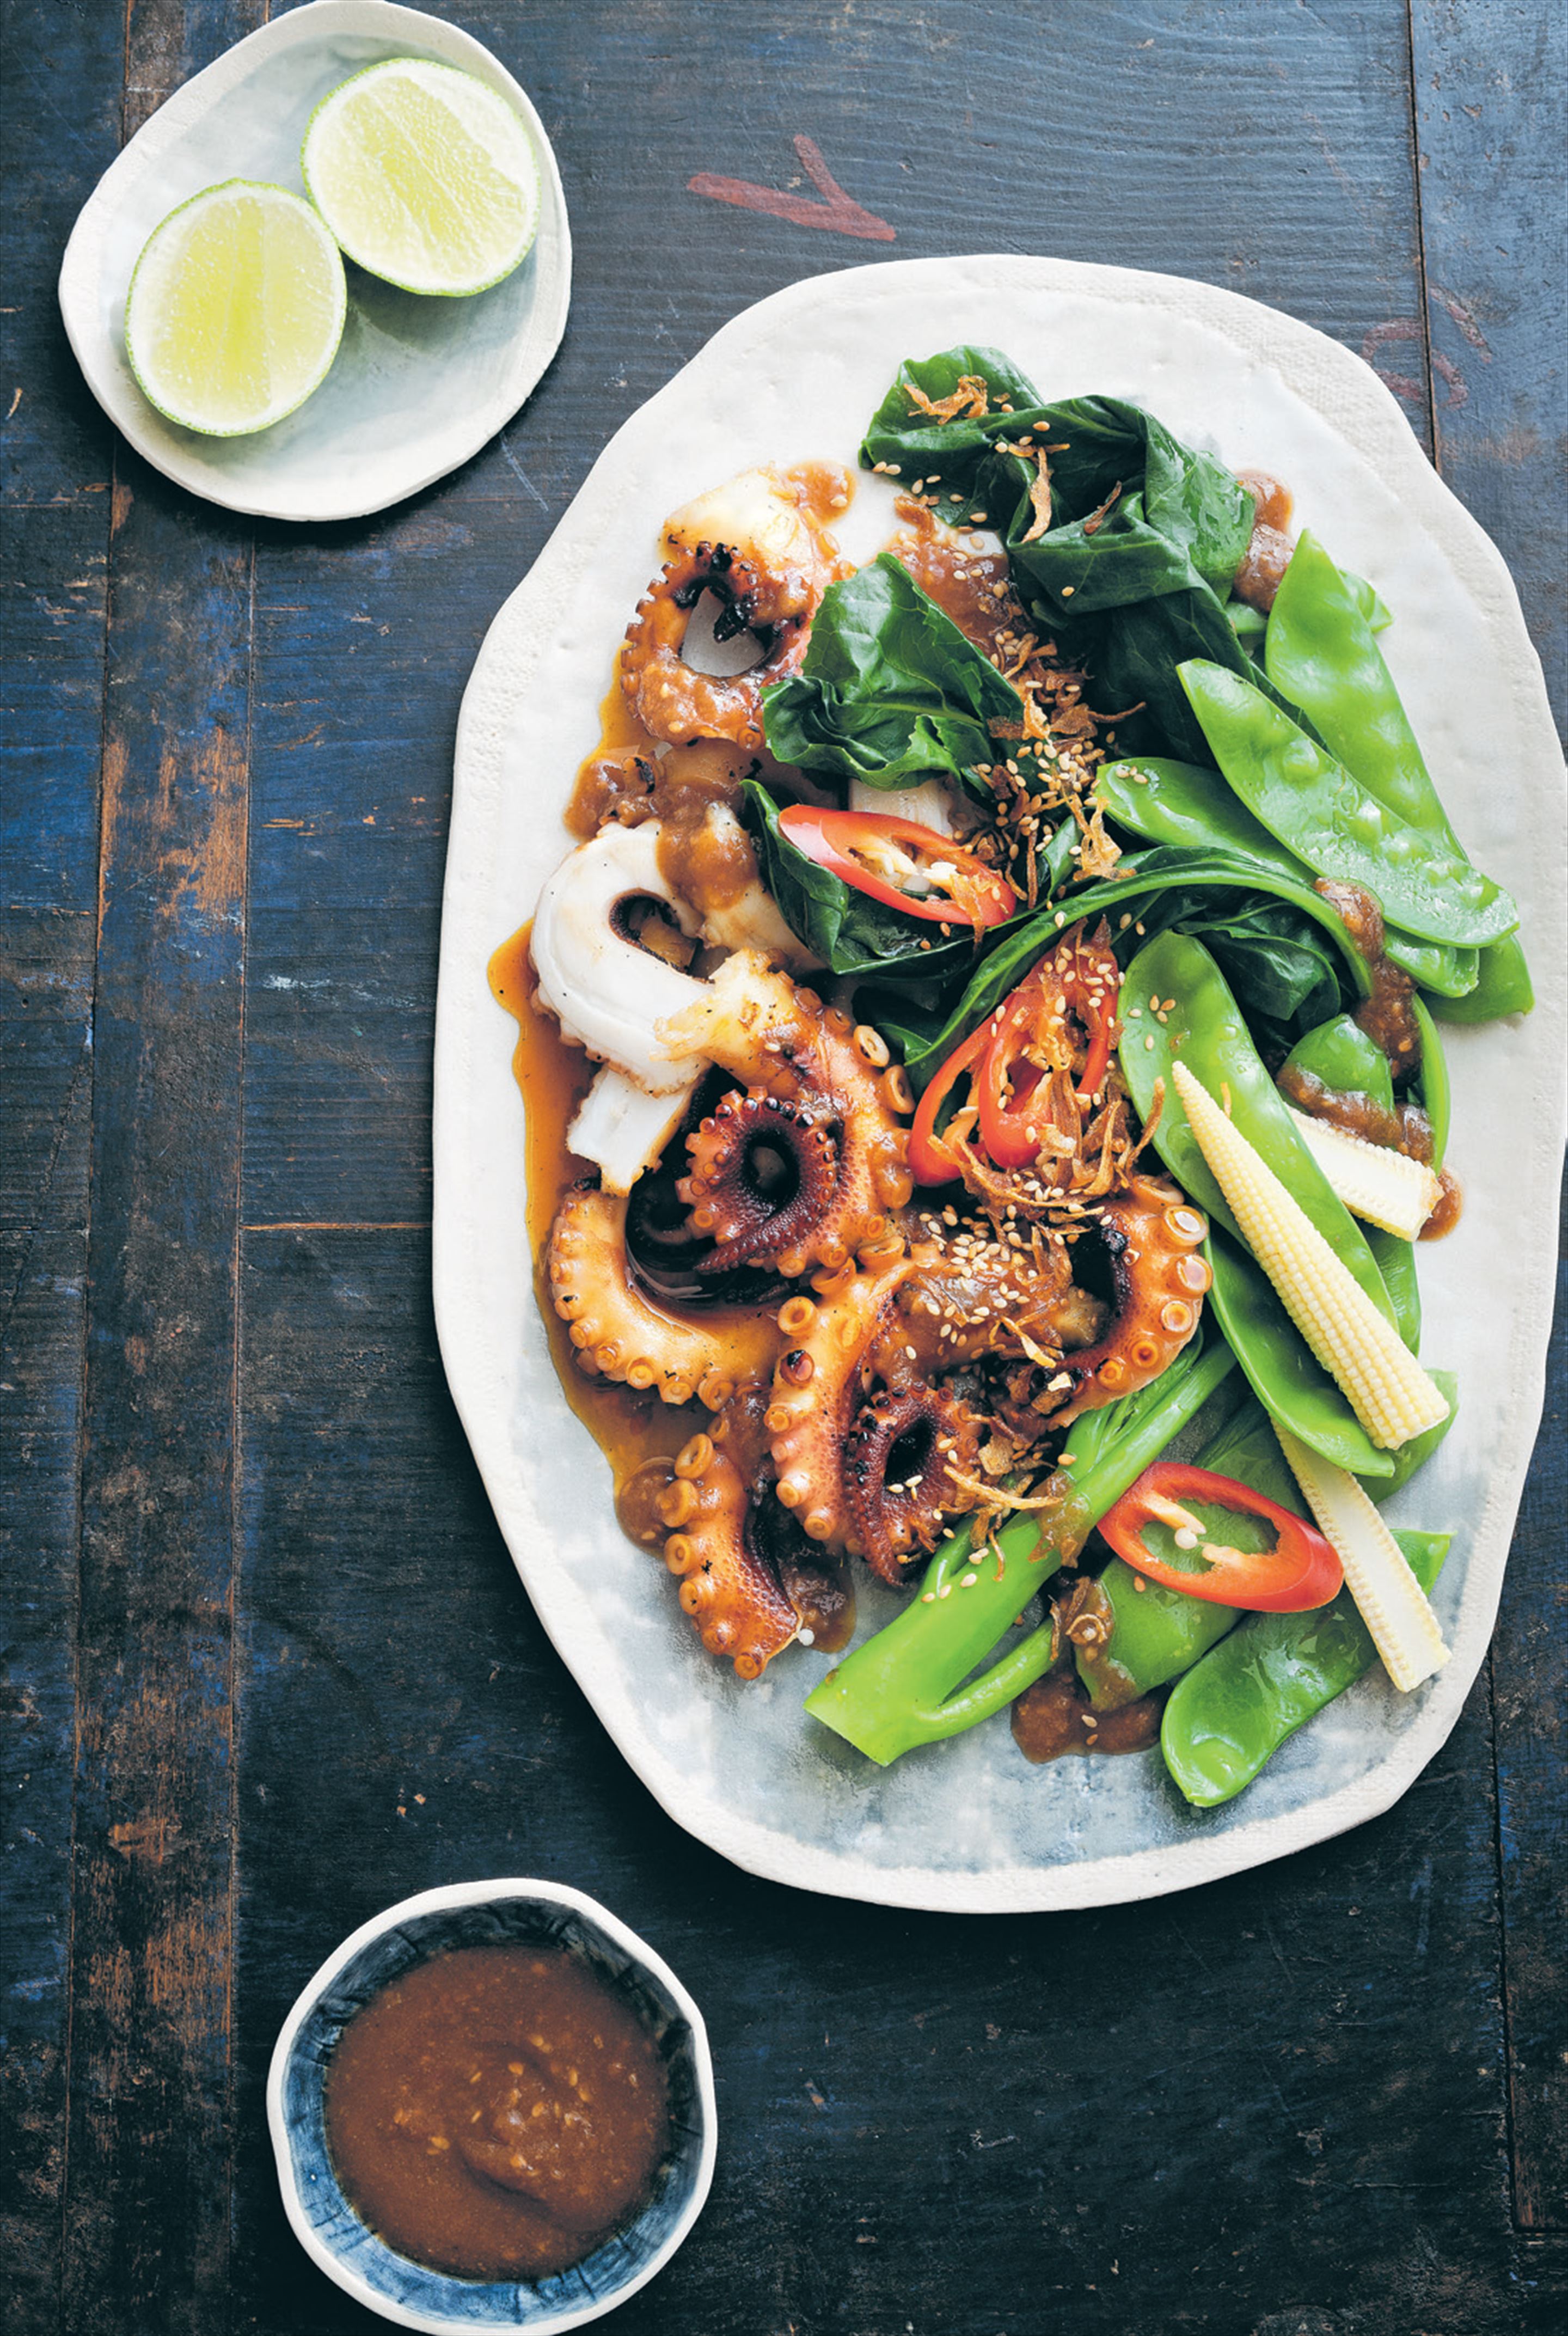 Grilled octopus, Asian vegetable and ginger salad with a tamarind and sesame dressing